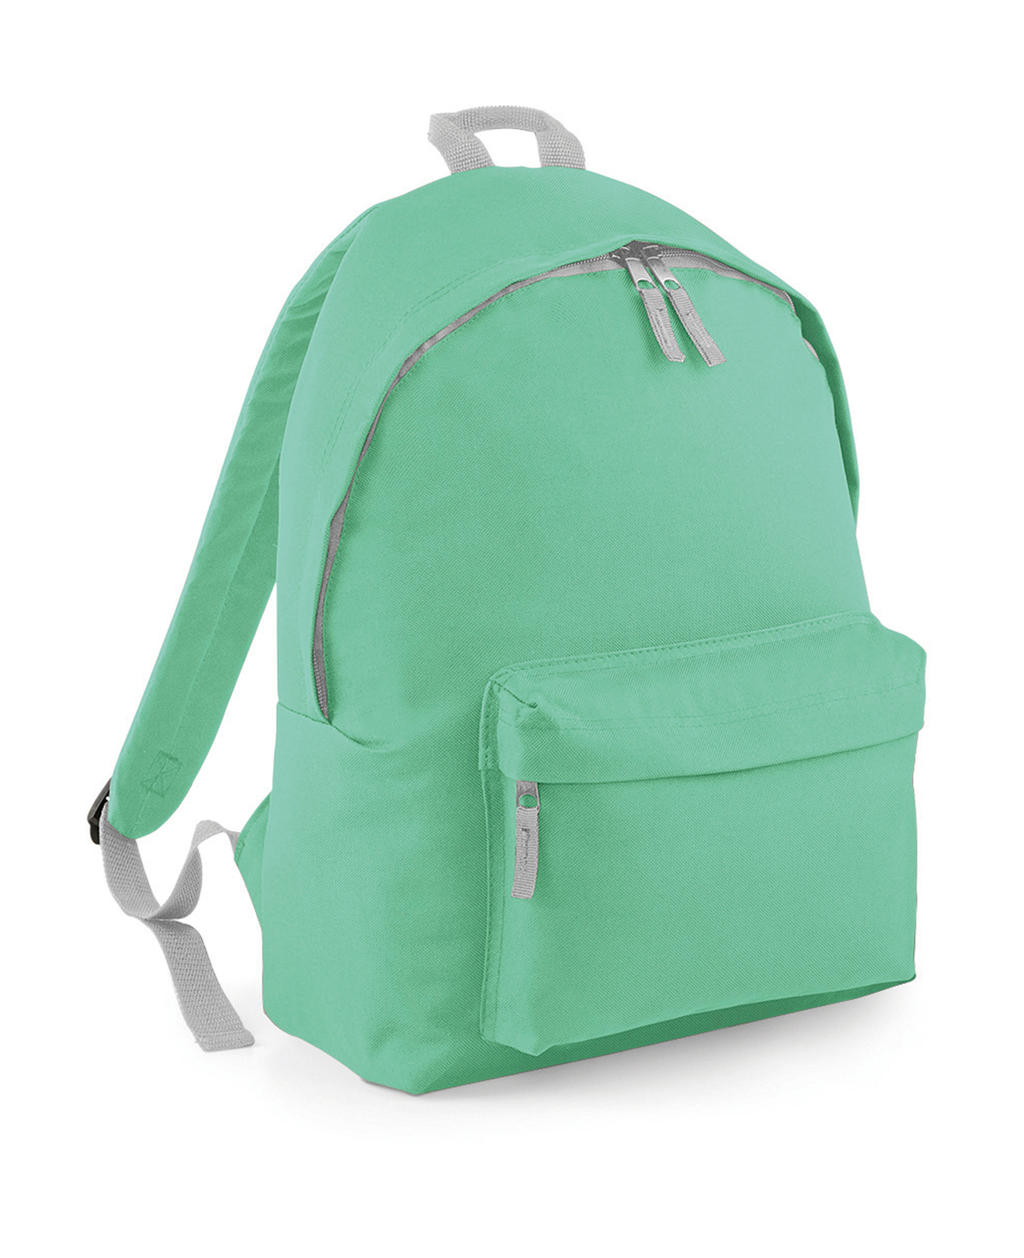  Original Fashion Backpack in Farbe Mint Green/Light Grey